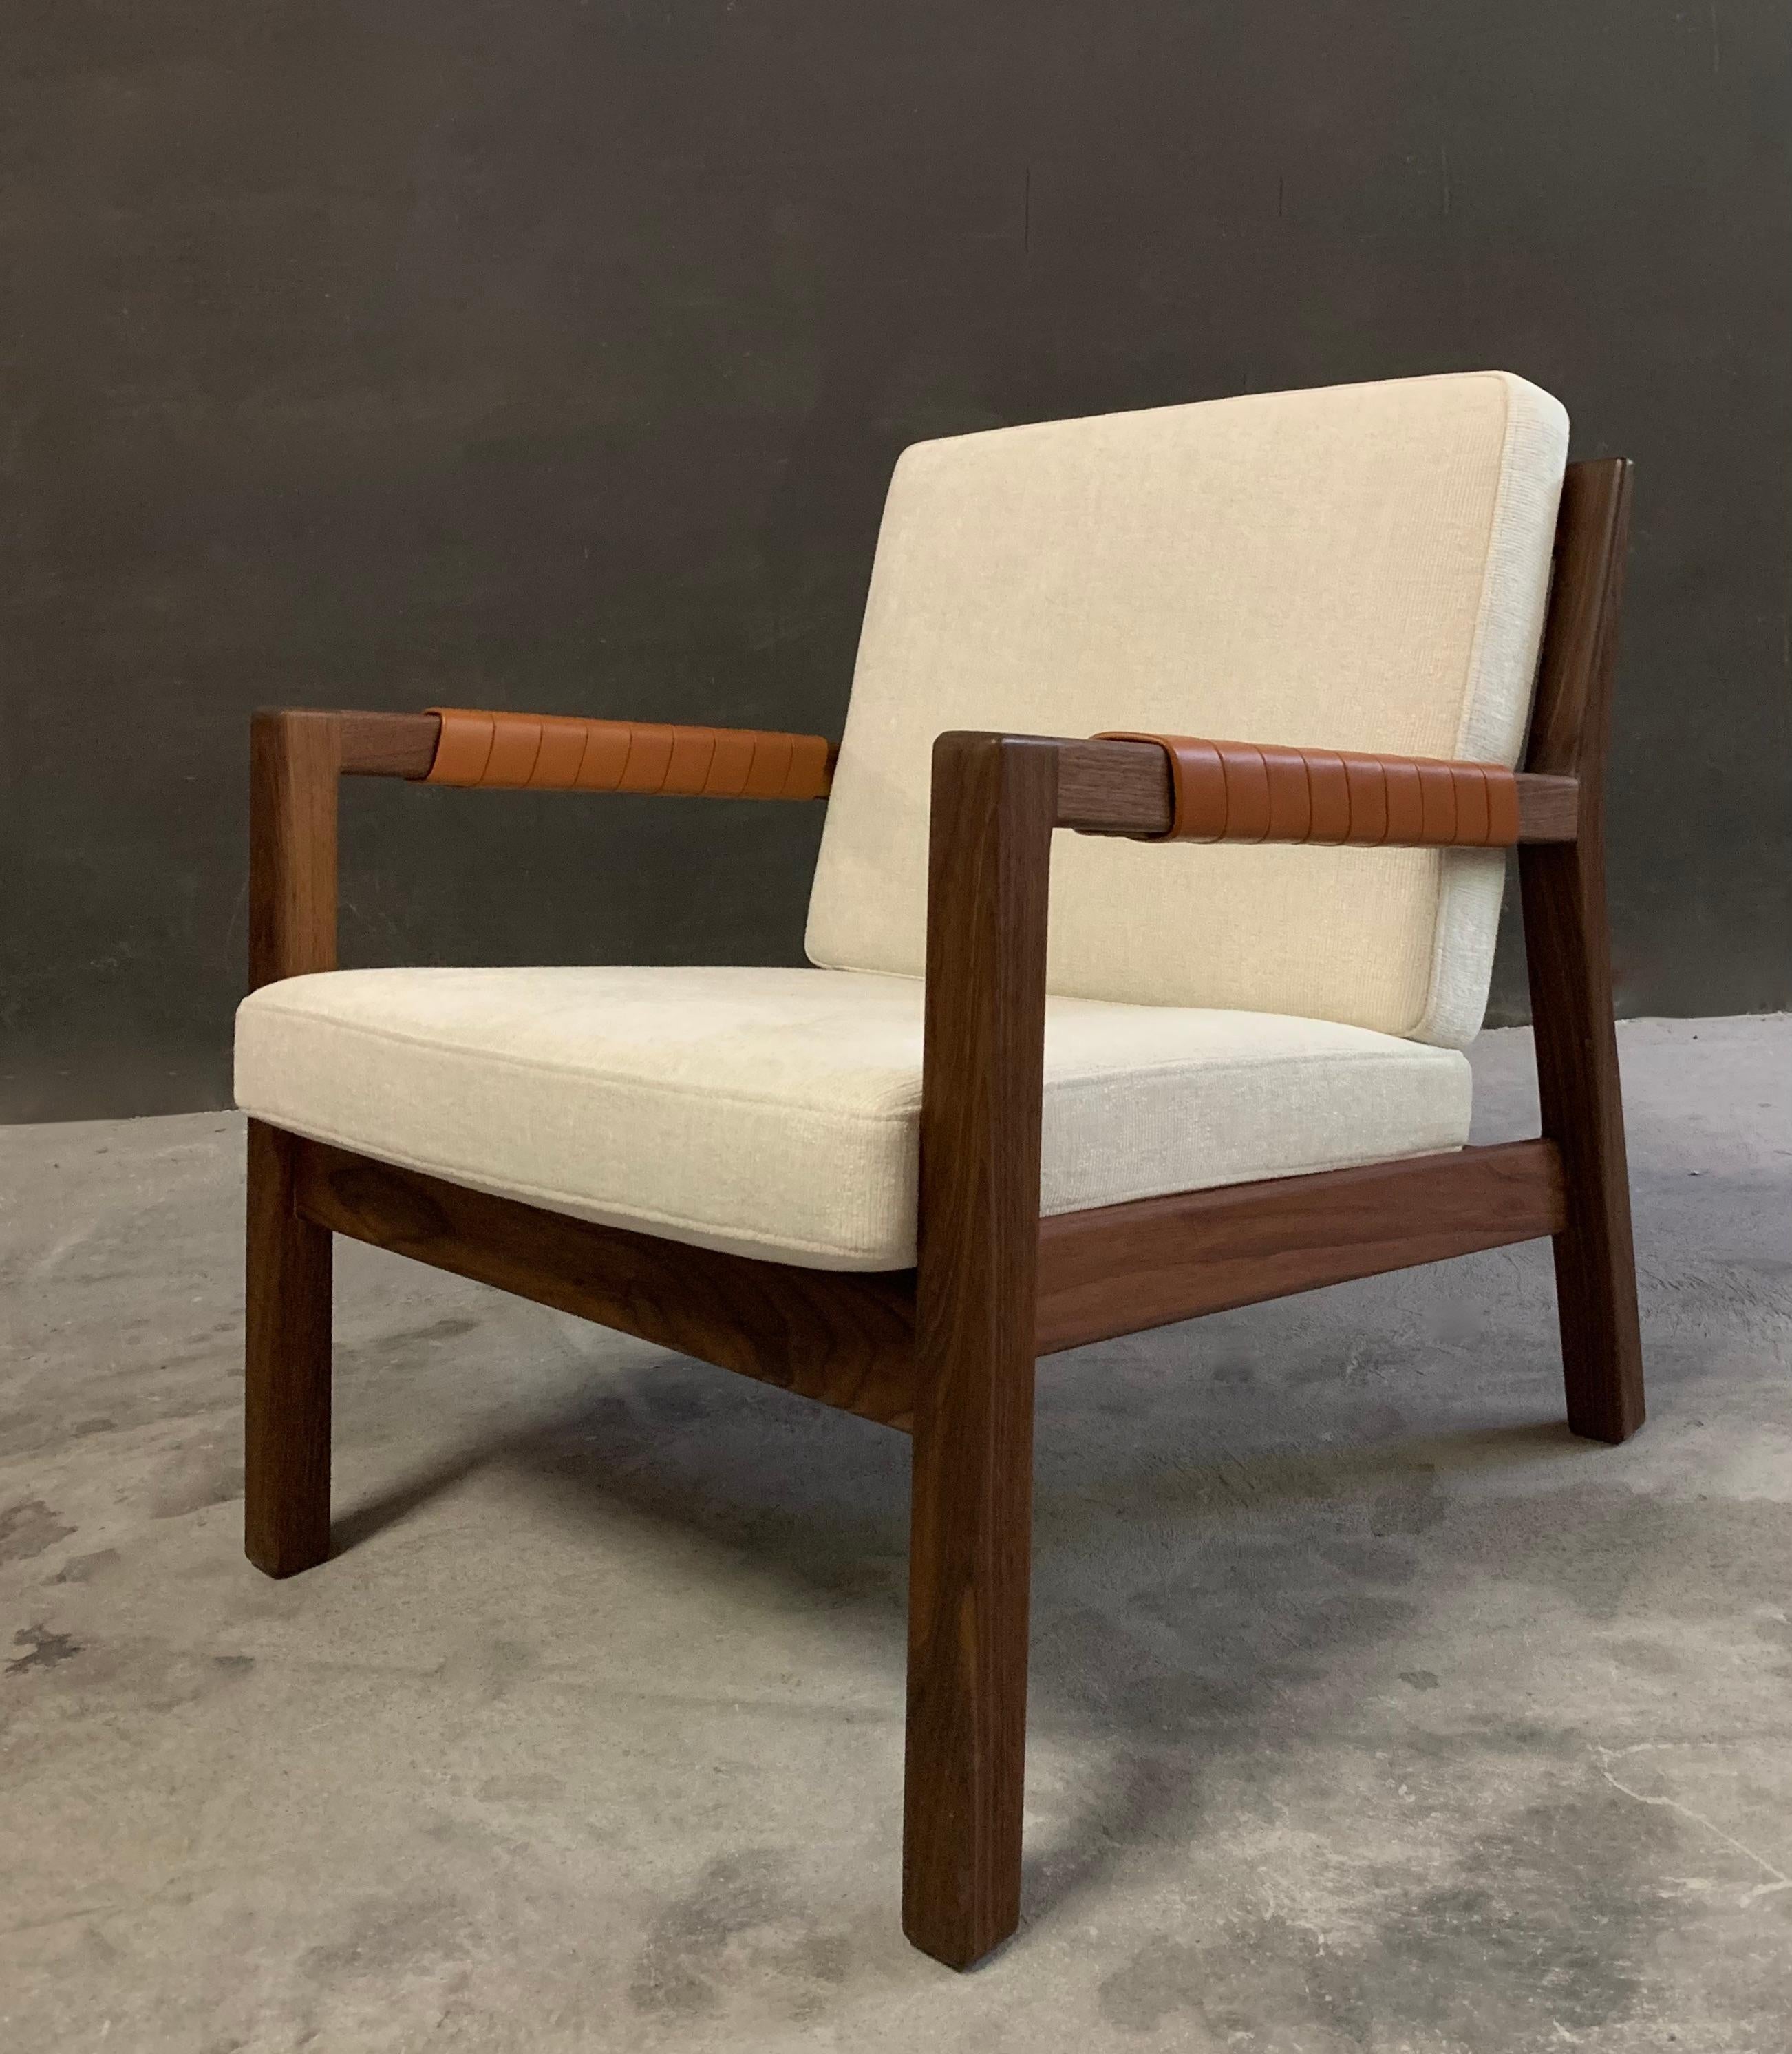 Chair 'Rialto's streamlined design and sophisticated details engage in a fascinating dialogue. The braided leather straps at the back and curved legs give Rialto its unique appearance that especially comes to its own when the chair is placed